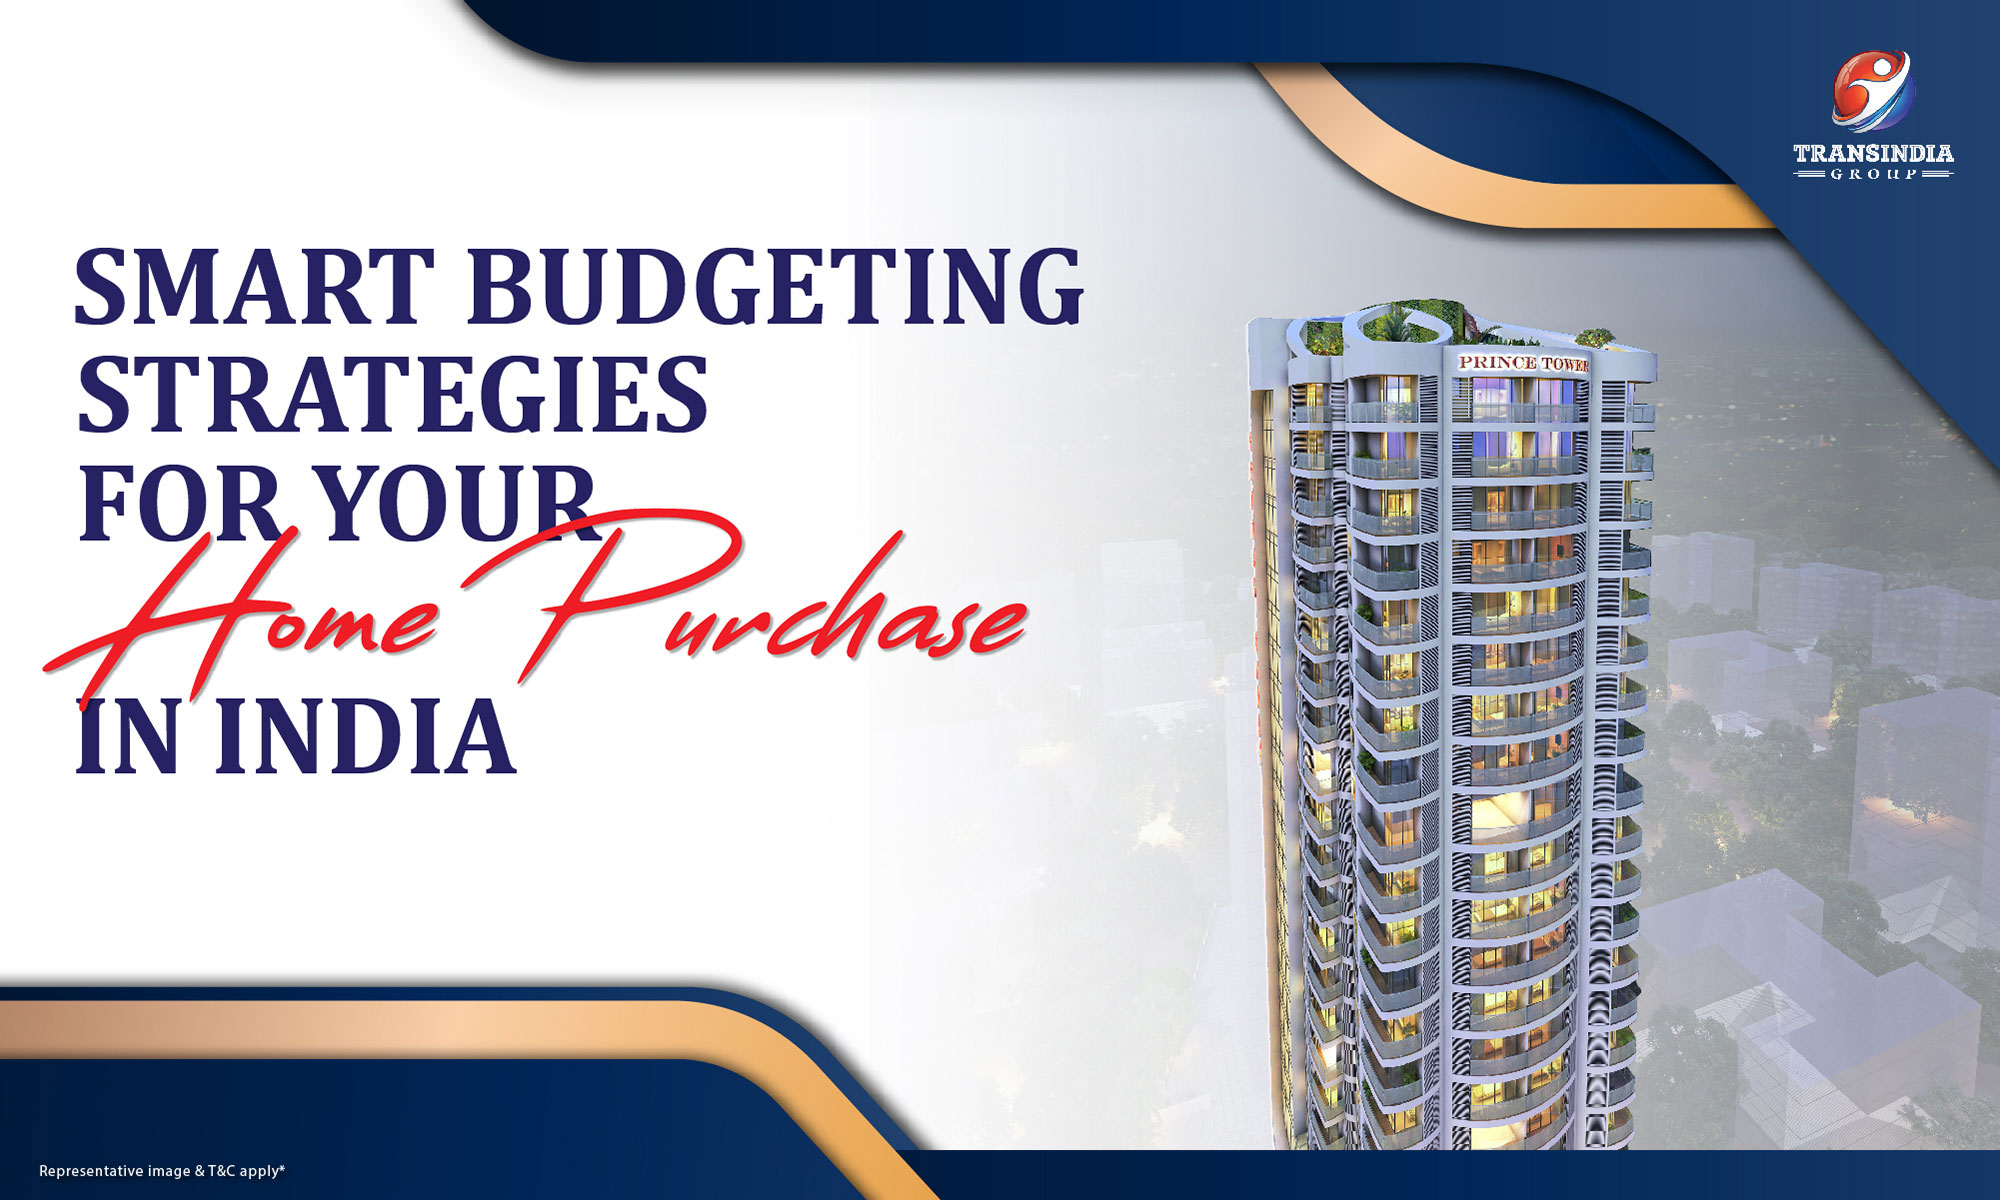 Smart Budgeting Strategies for Your Home Purchase in India